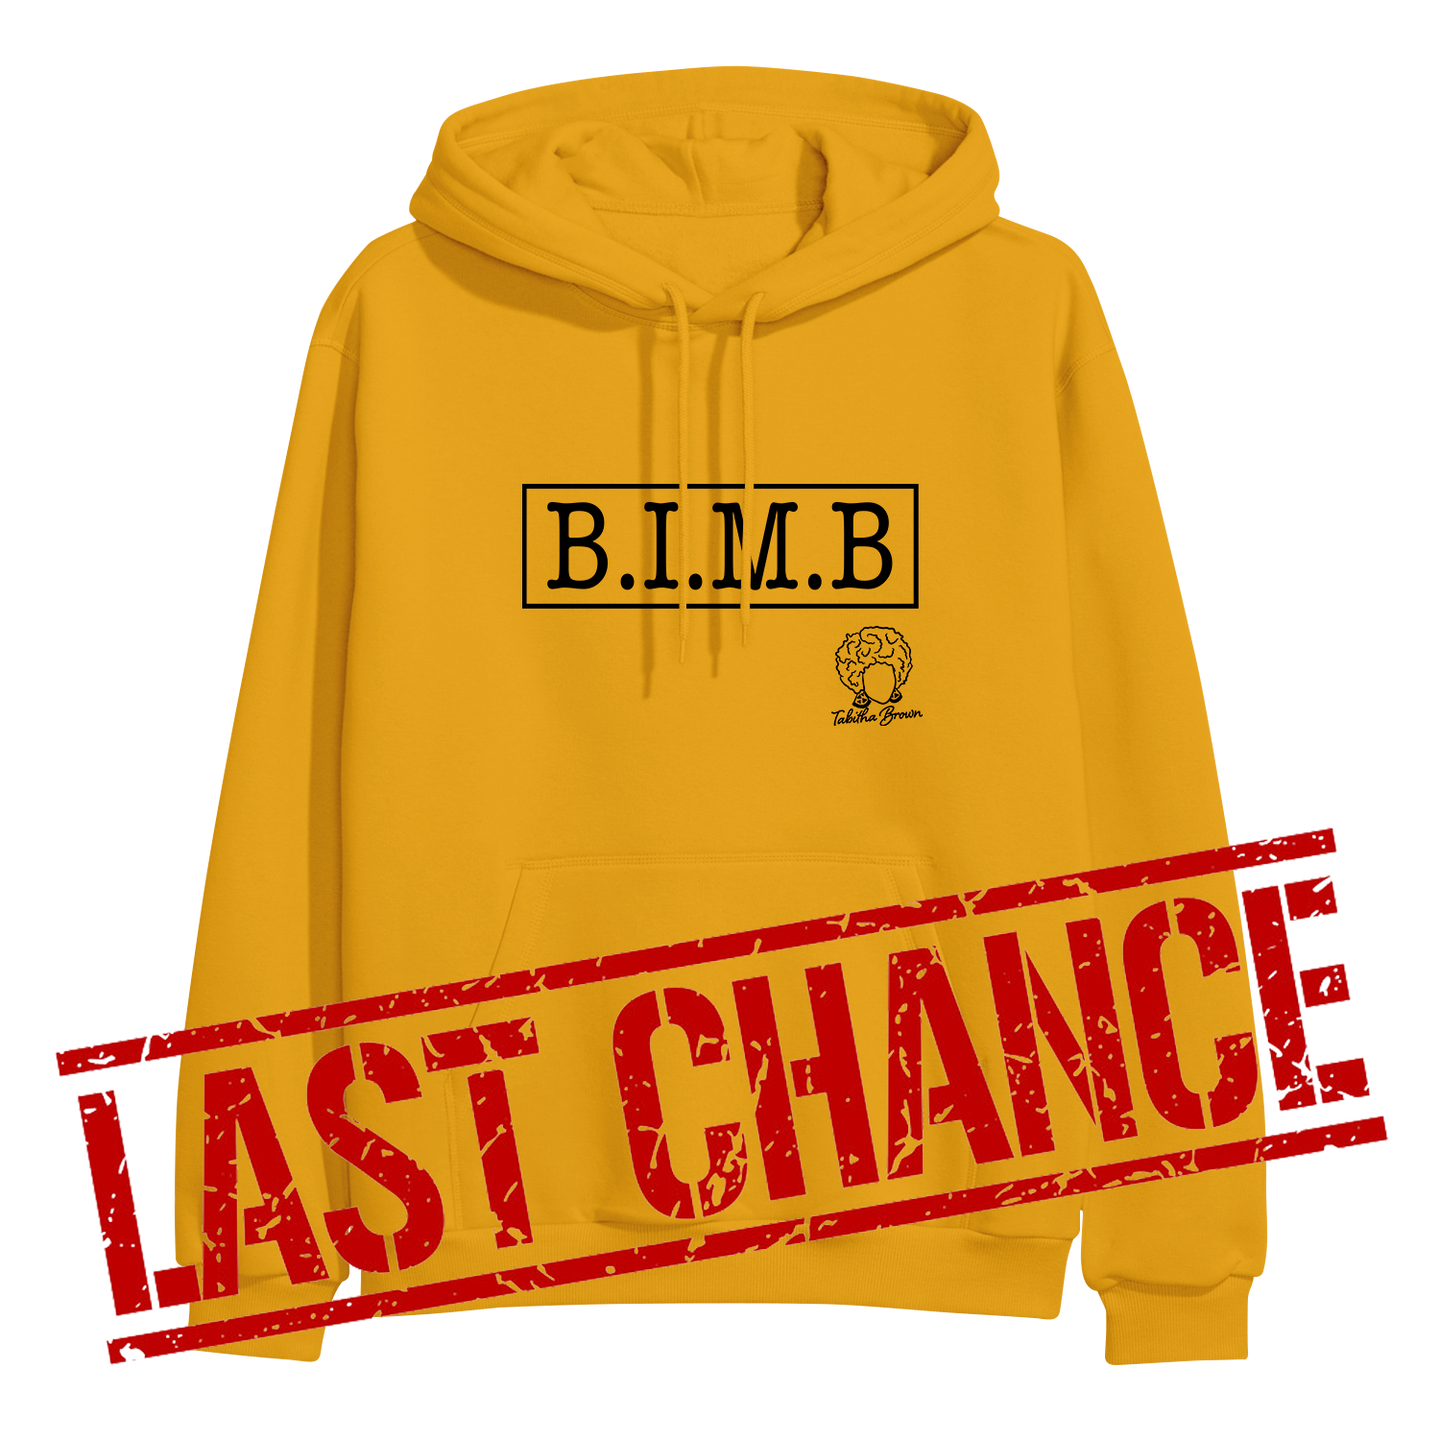 image of gold pullover hoodie on clear background. hoodie has full chest print in black that has a rectangle, and inside that in capital letters says B I M B and outside the rectangle on the bottom right is tabitha brown's logo of her head wearing earrings and her name in cursive. over the bottom part of the image in large red text says last chance.